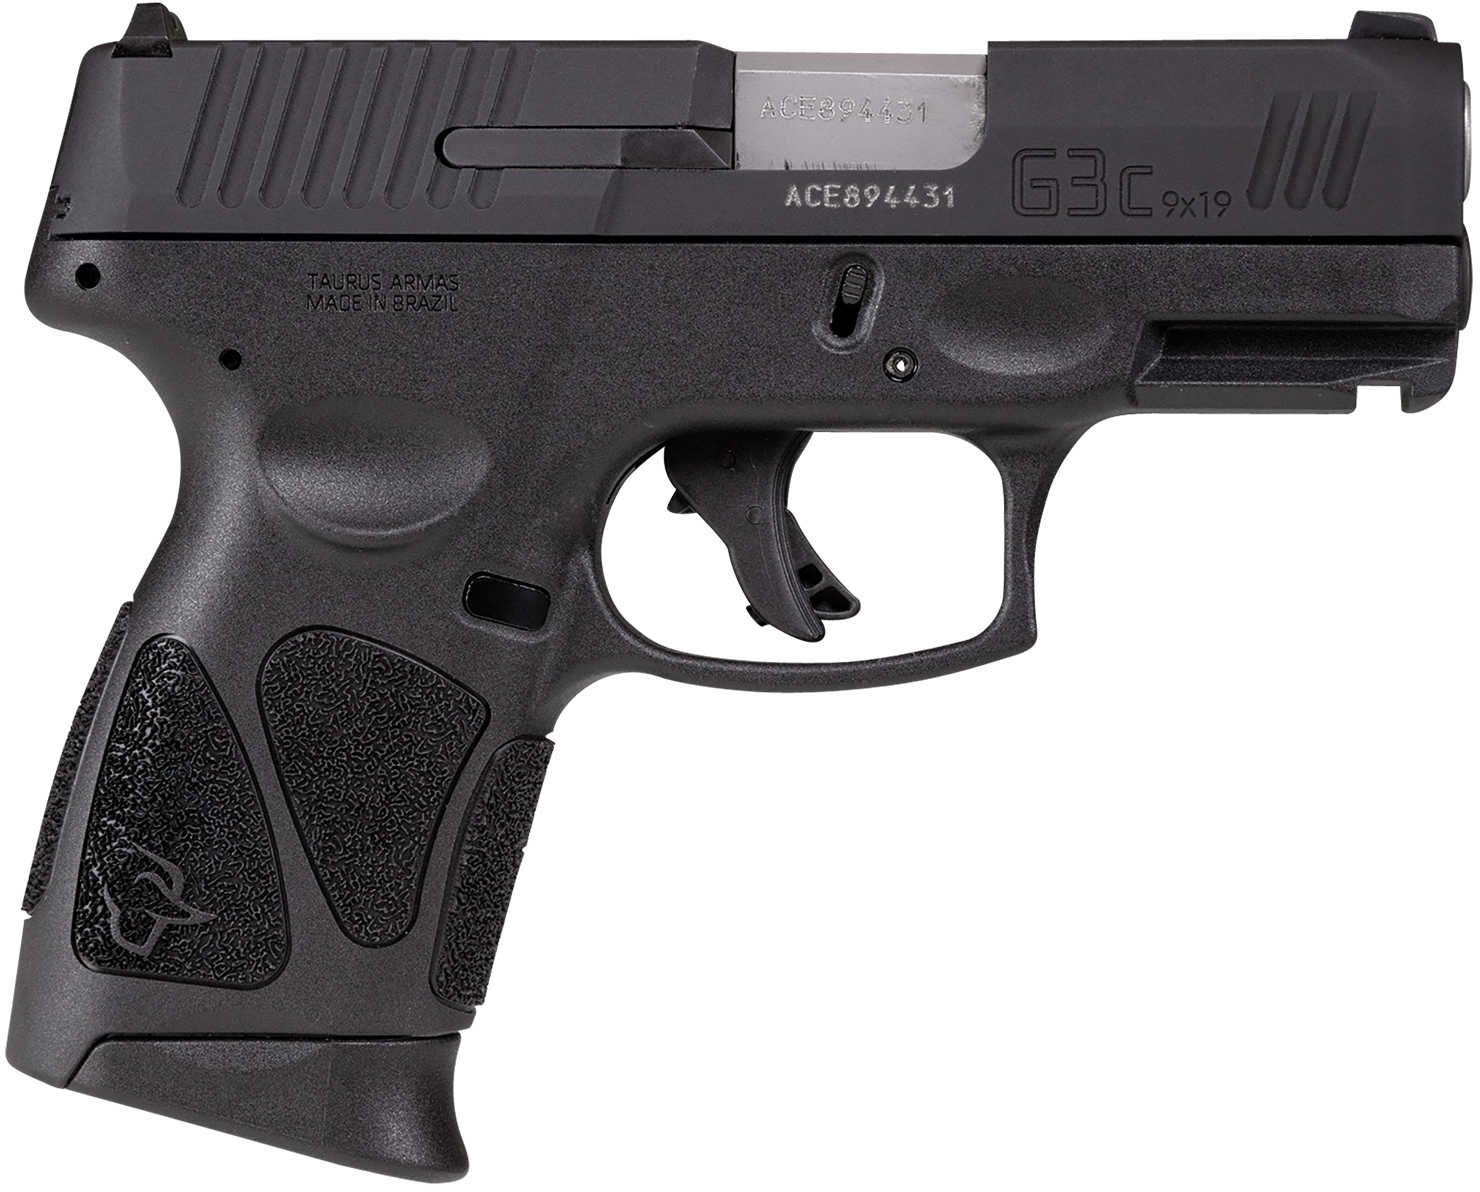 Taurus G3C Single Action Semi-Auto Pistol 9mm Luger 3.2" Barrel (3)-12Rd Mags FT: Fixed White Dot RR: Adjustable Sights Matte Black Finish